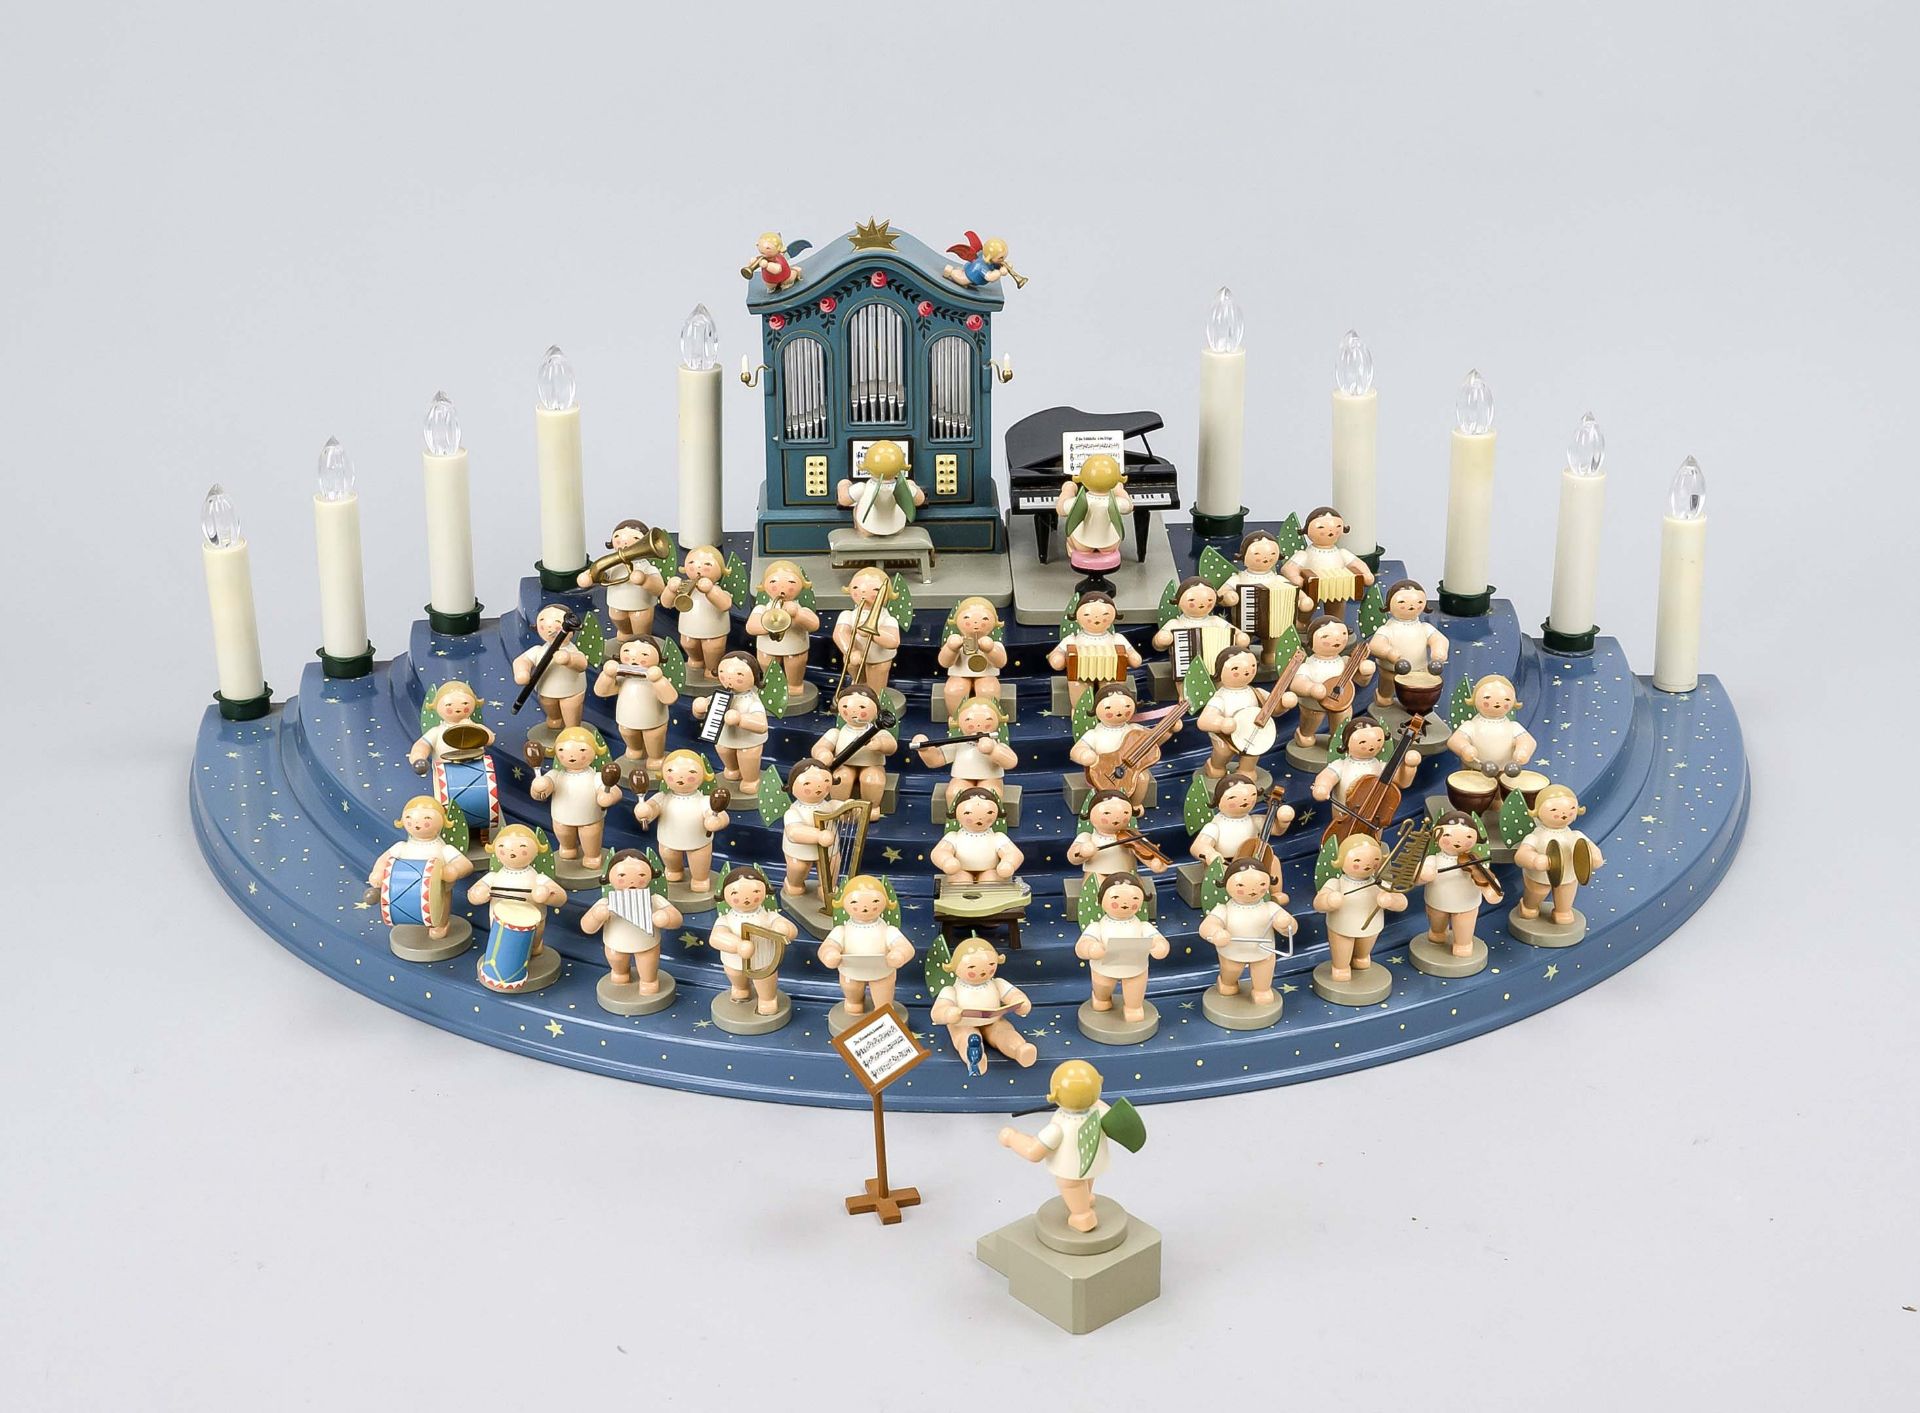 Christmas chapel Erzgebirge, 43 figures complete with large pedestal and organ, 20th century,